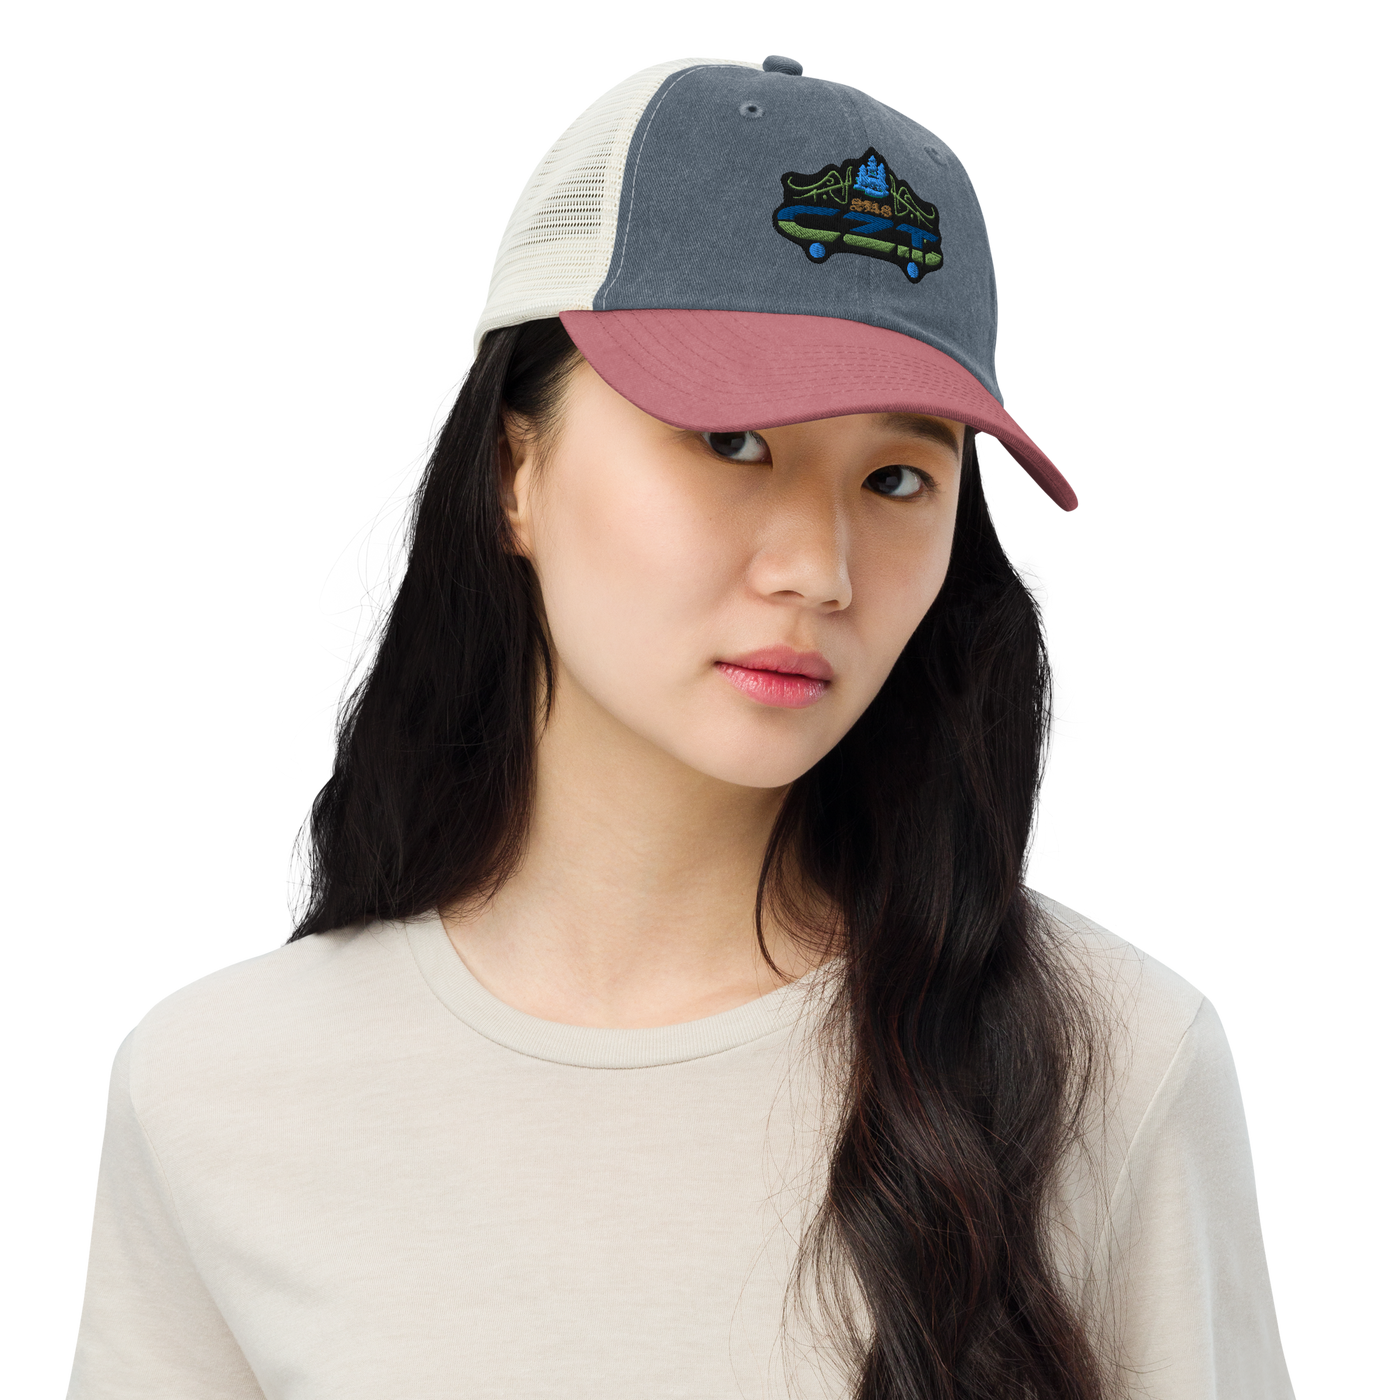 CZT SK8 Embroidered Vintage-Style Mesh Snapback Cap